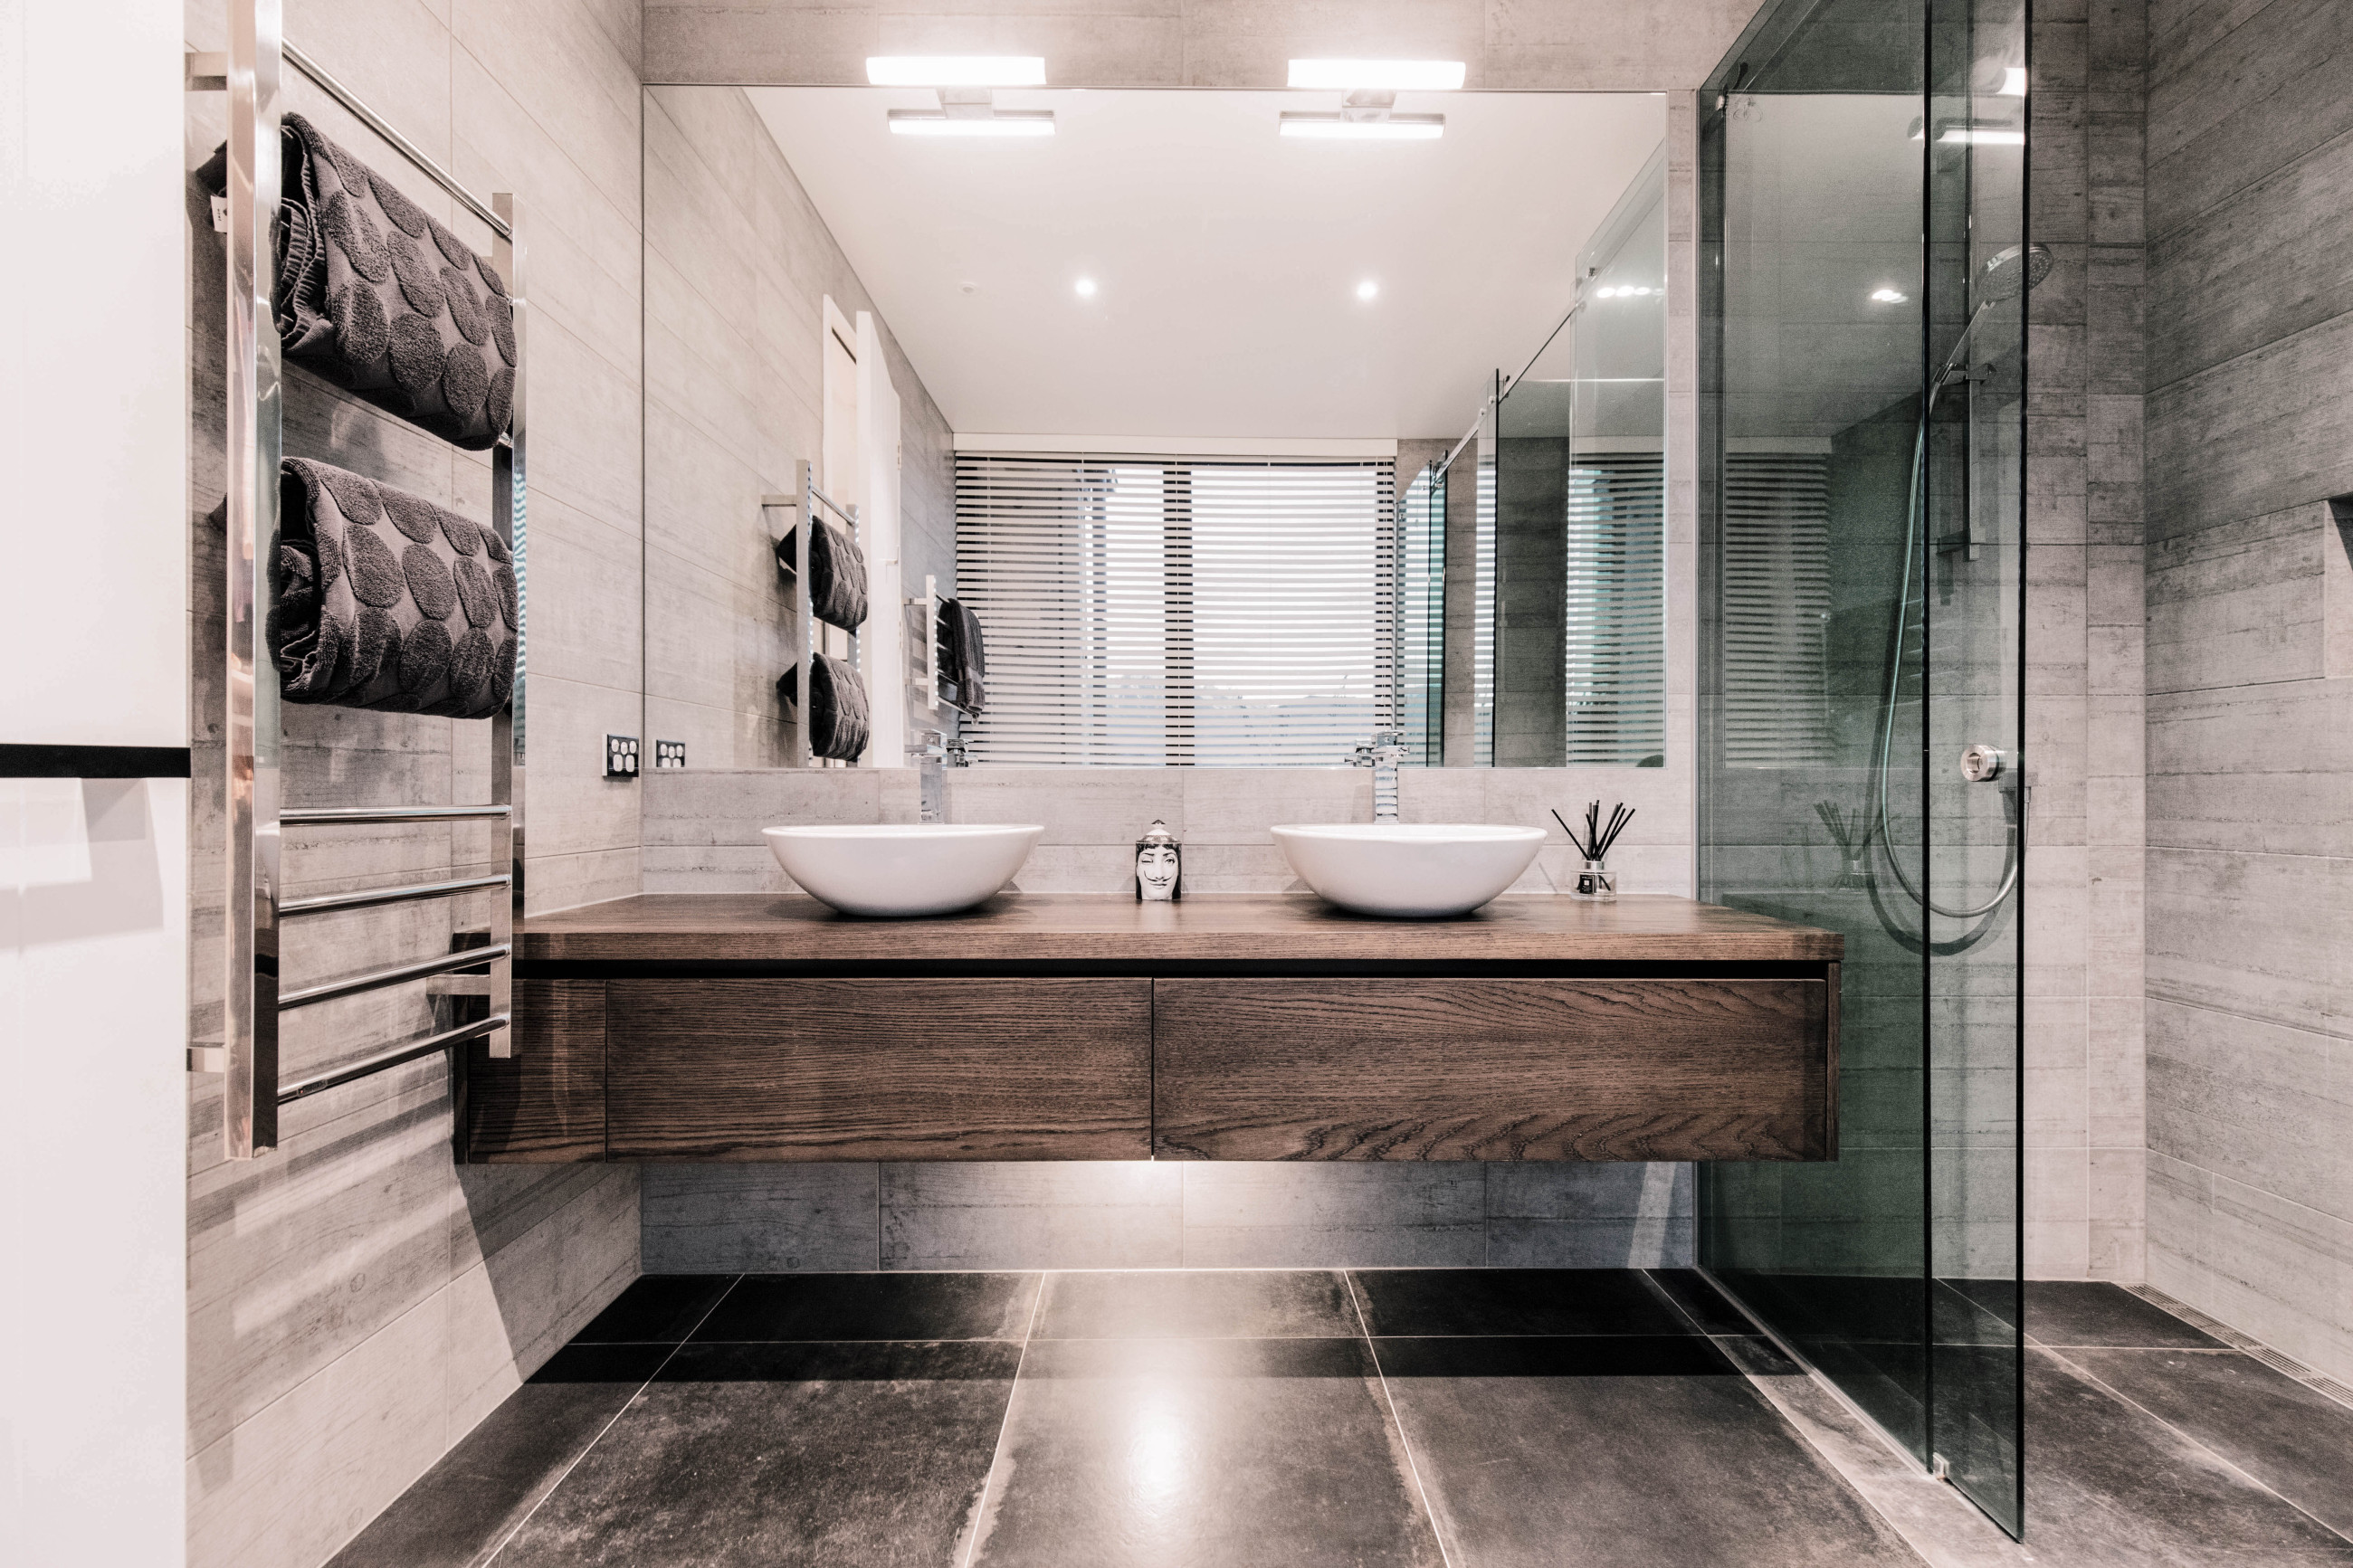 Modern bathroom with a transparent glass shower screen, bath, basin, and a feature wall of marbled tiles